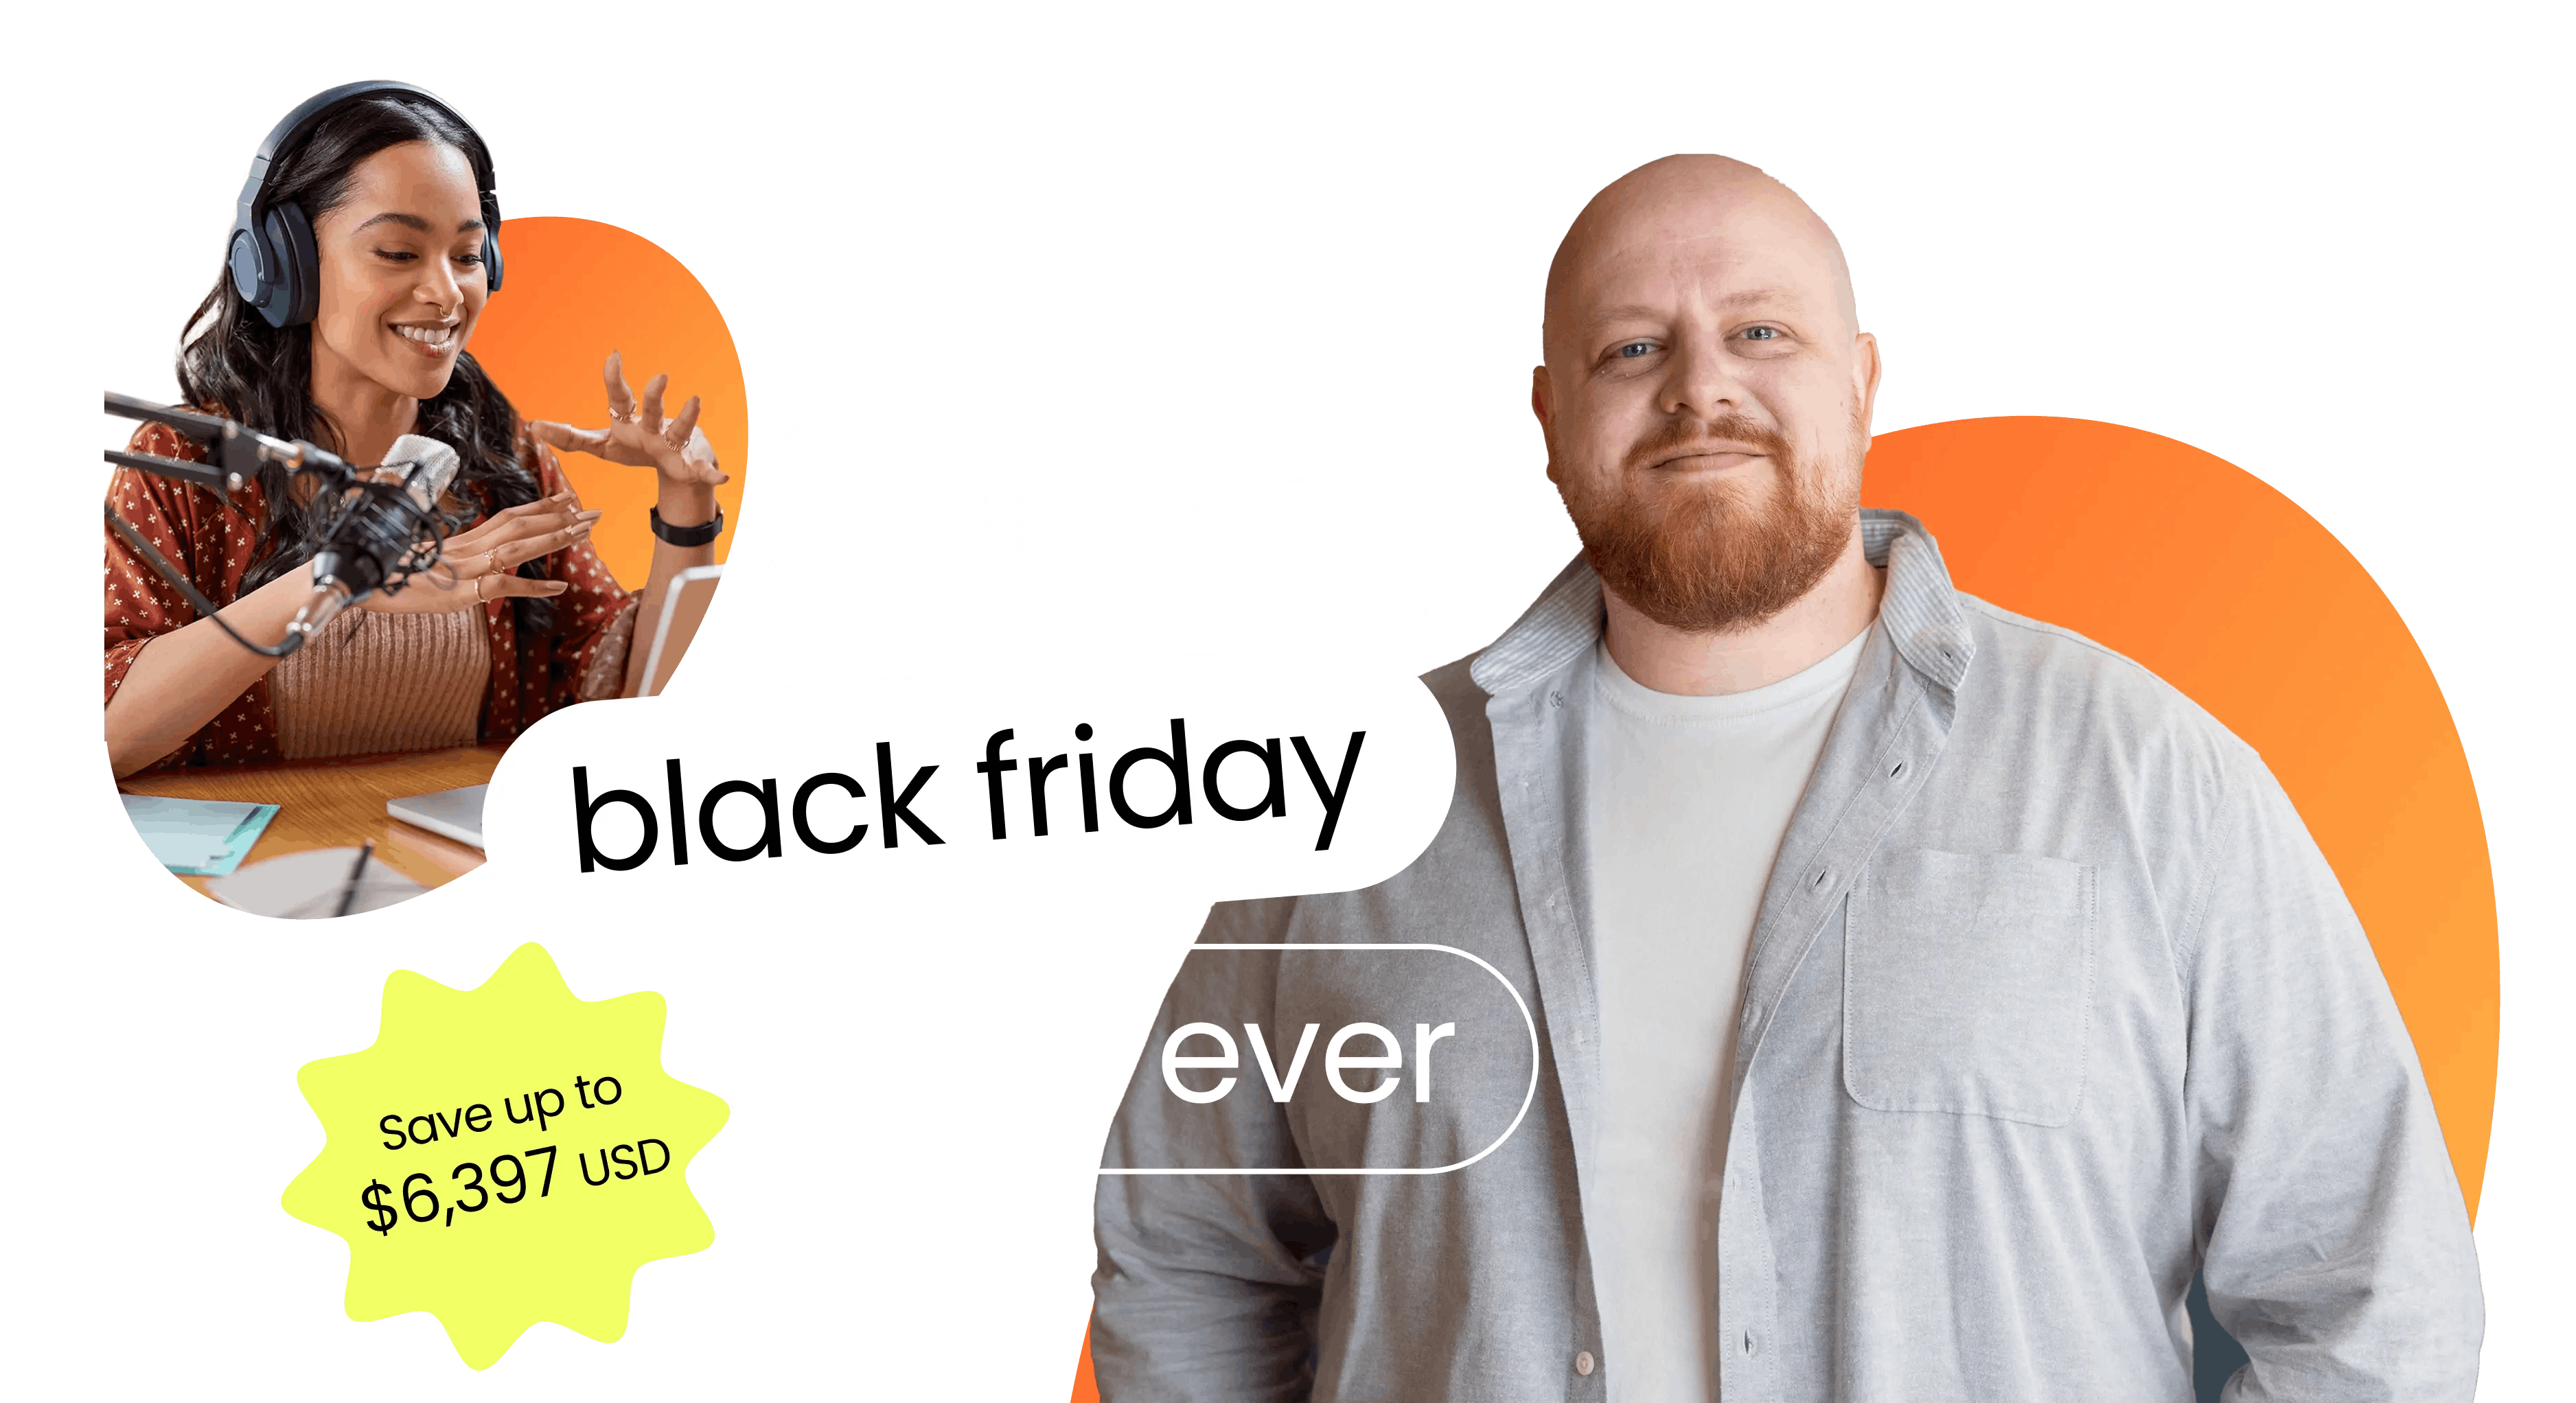 Black Friday promotional banner with savings up to $6,397 USD